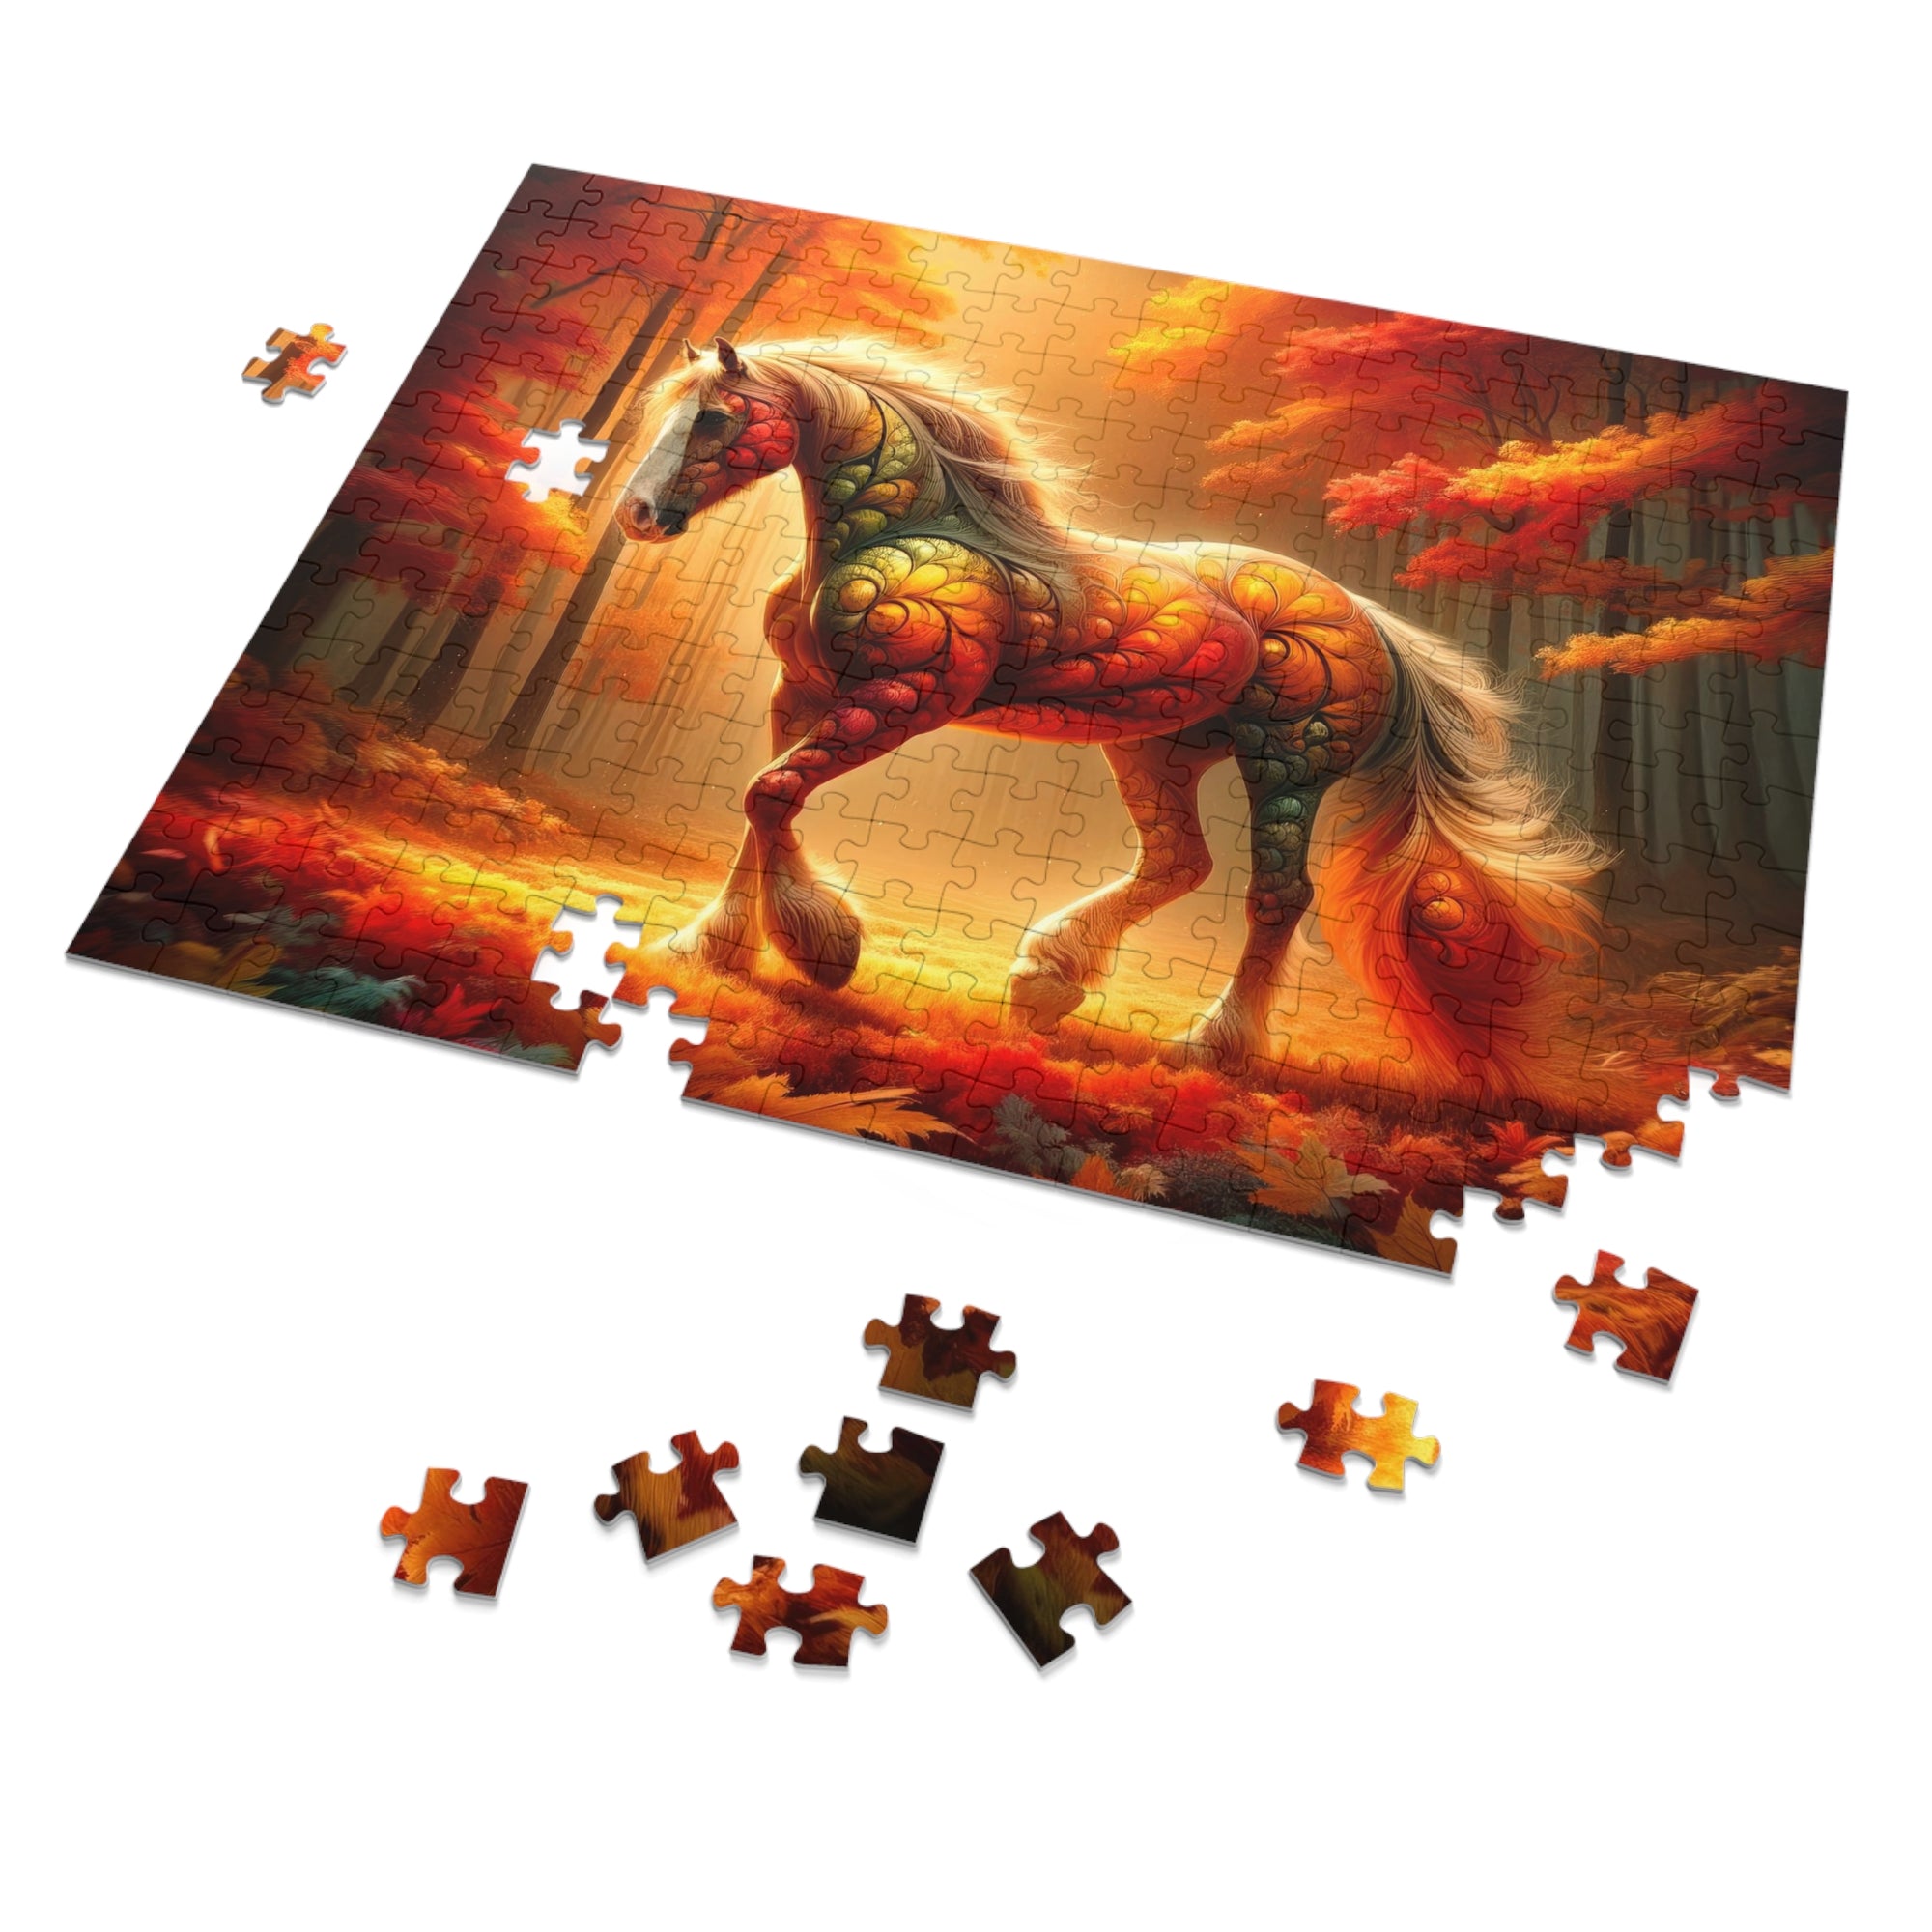 Autumn's Enchanted Steed Puzzle